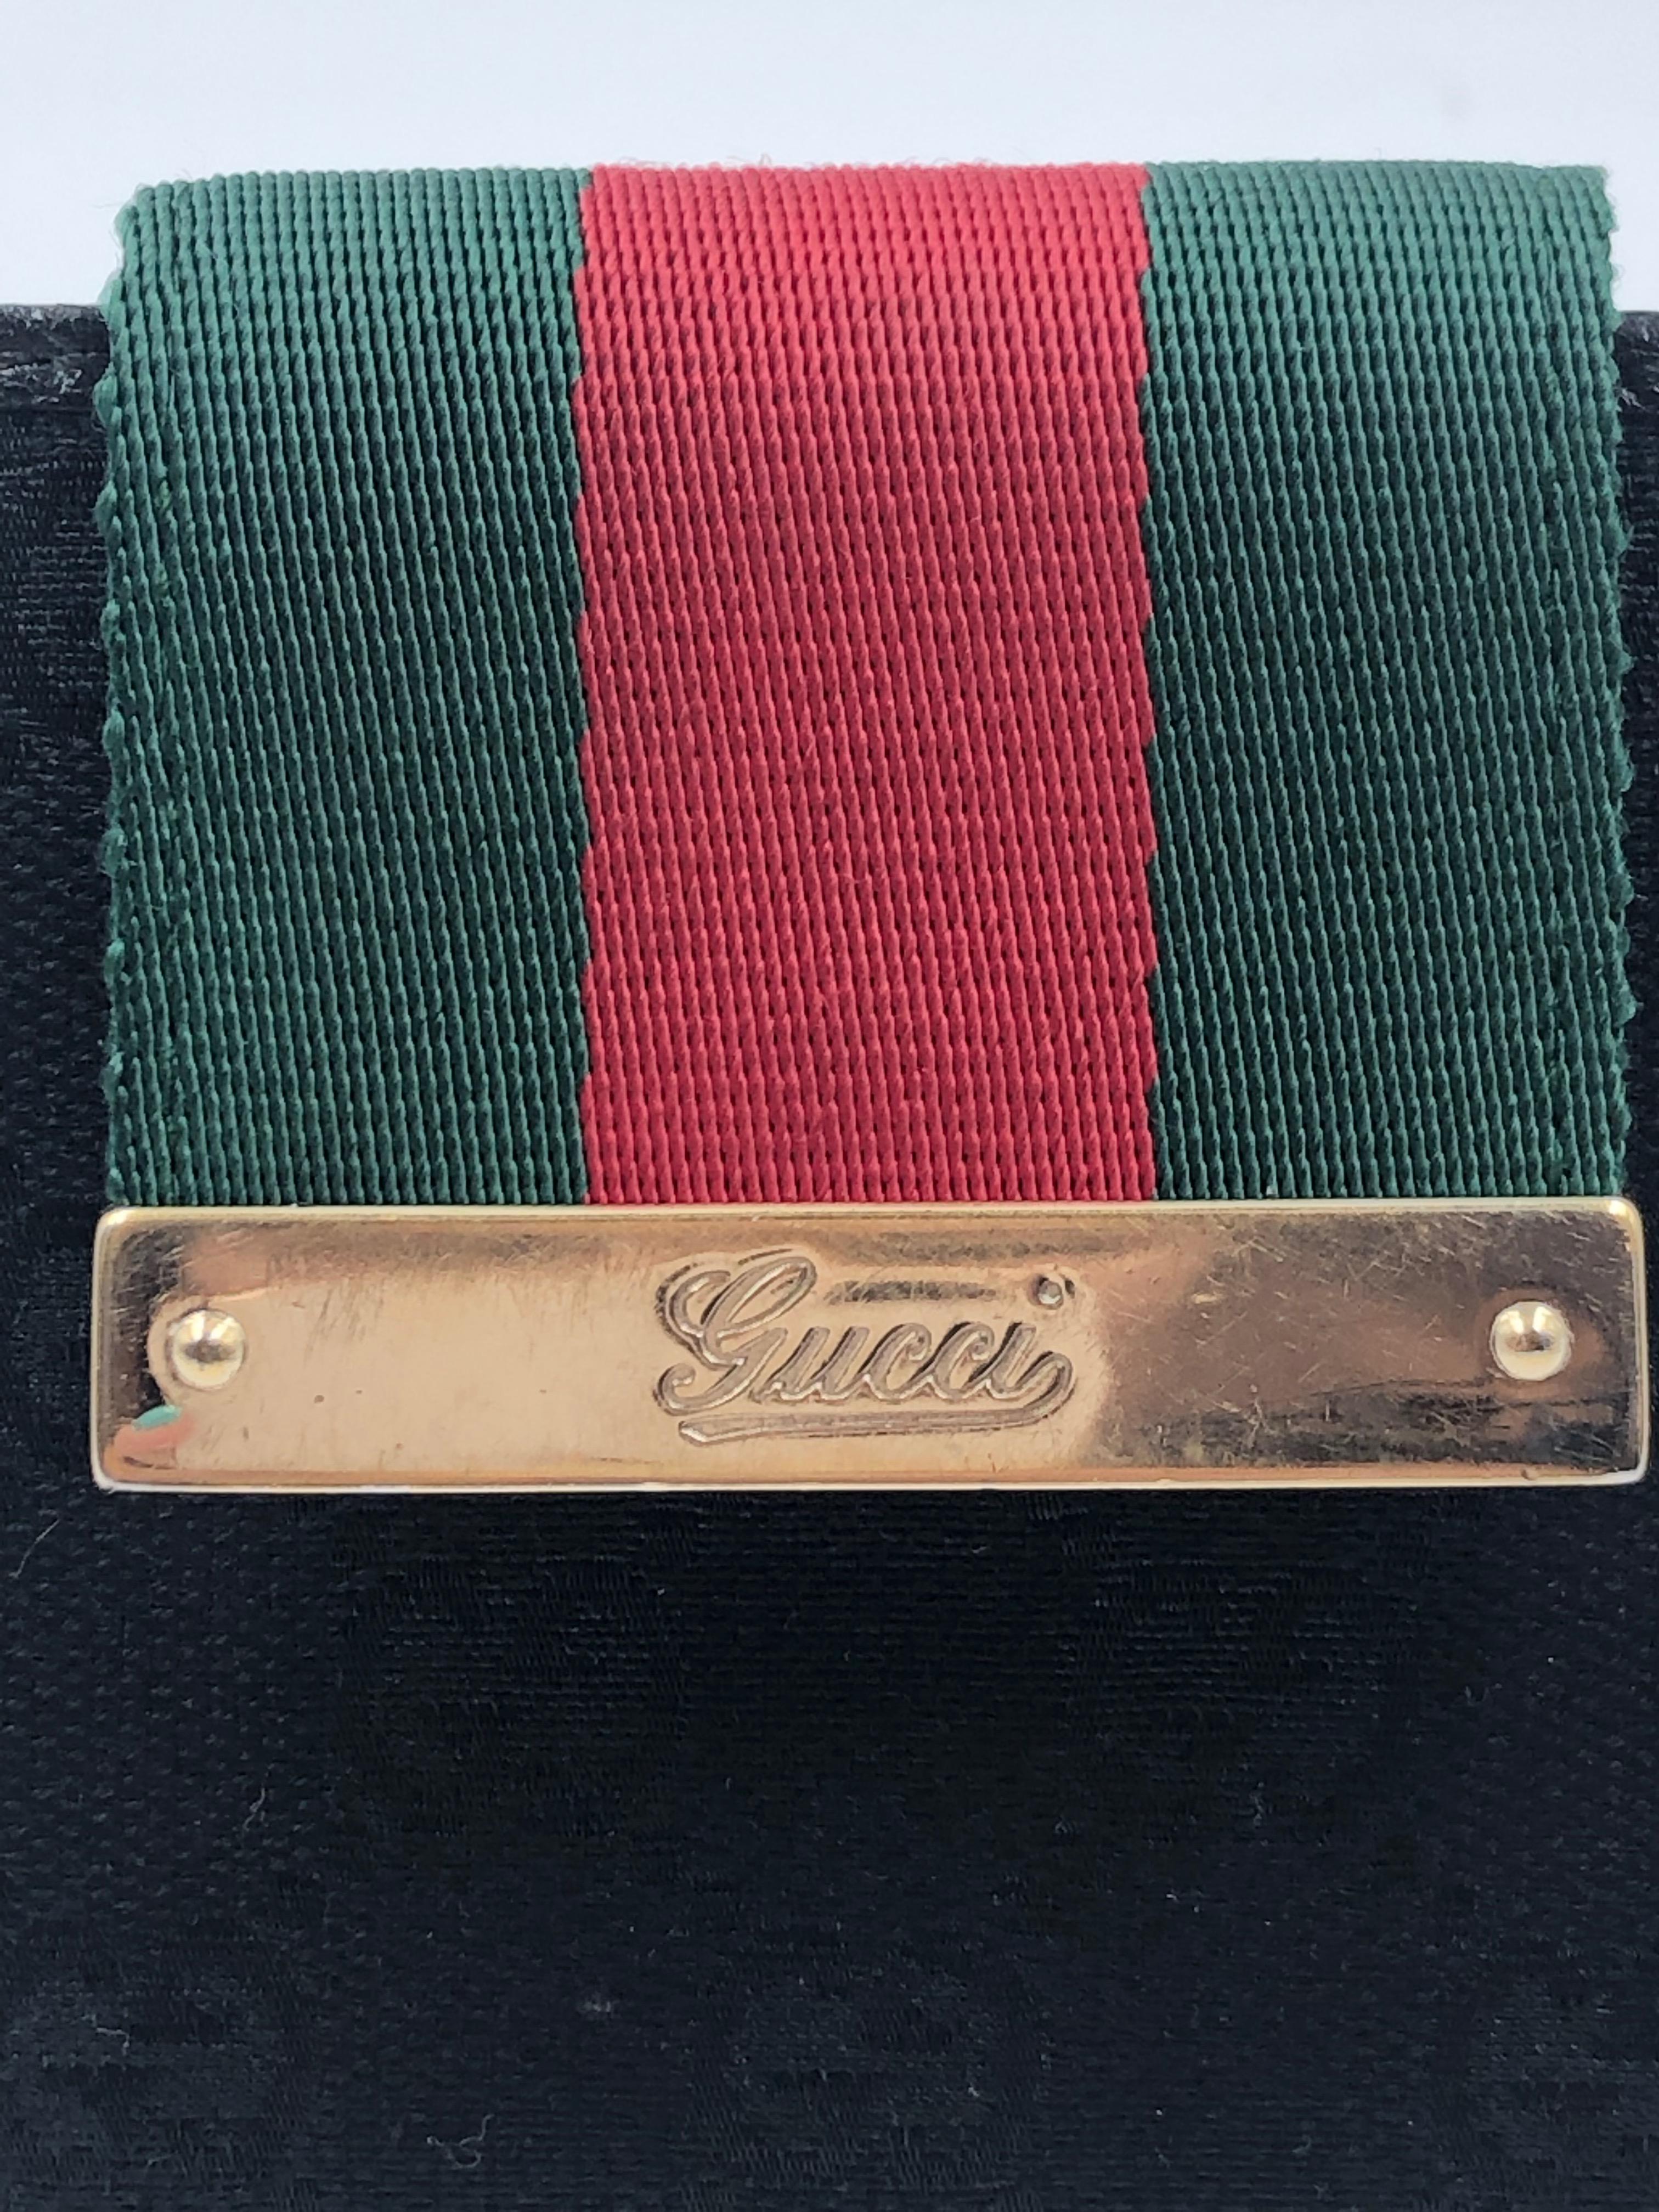 black gucci wallet with red and green stripe